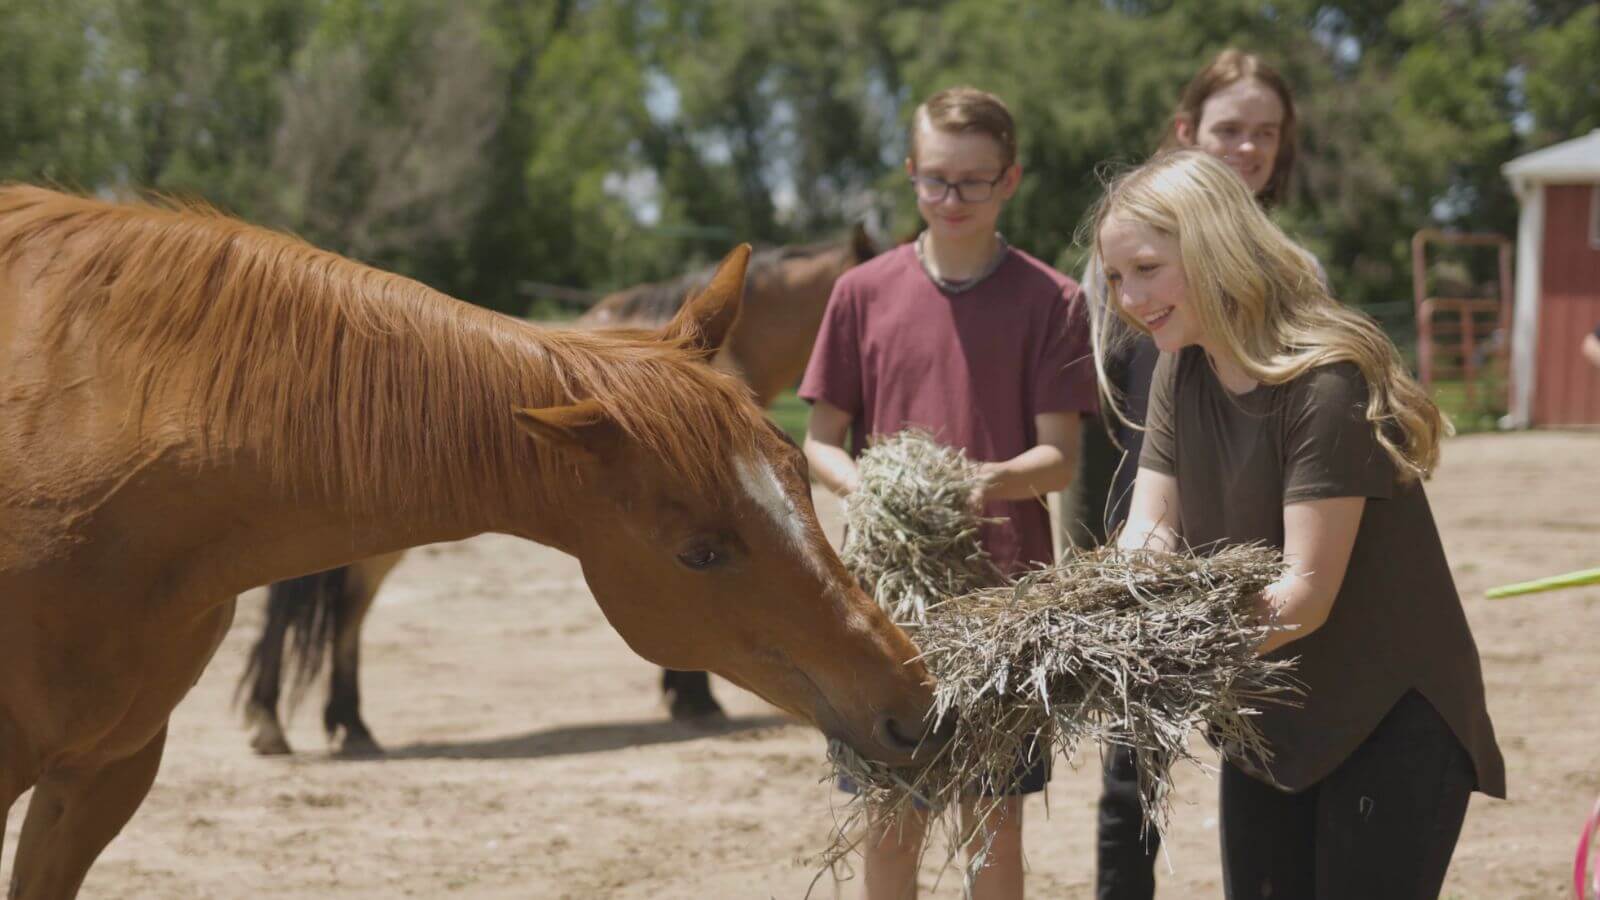 teens at equine therapy feeding hay to a horse.